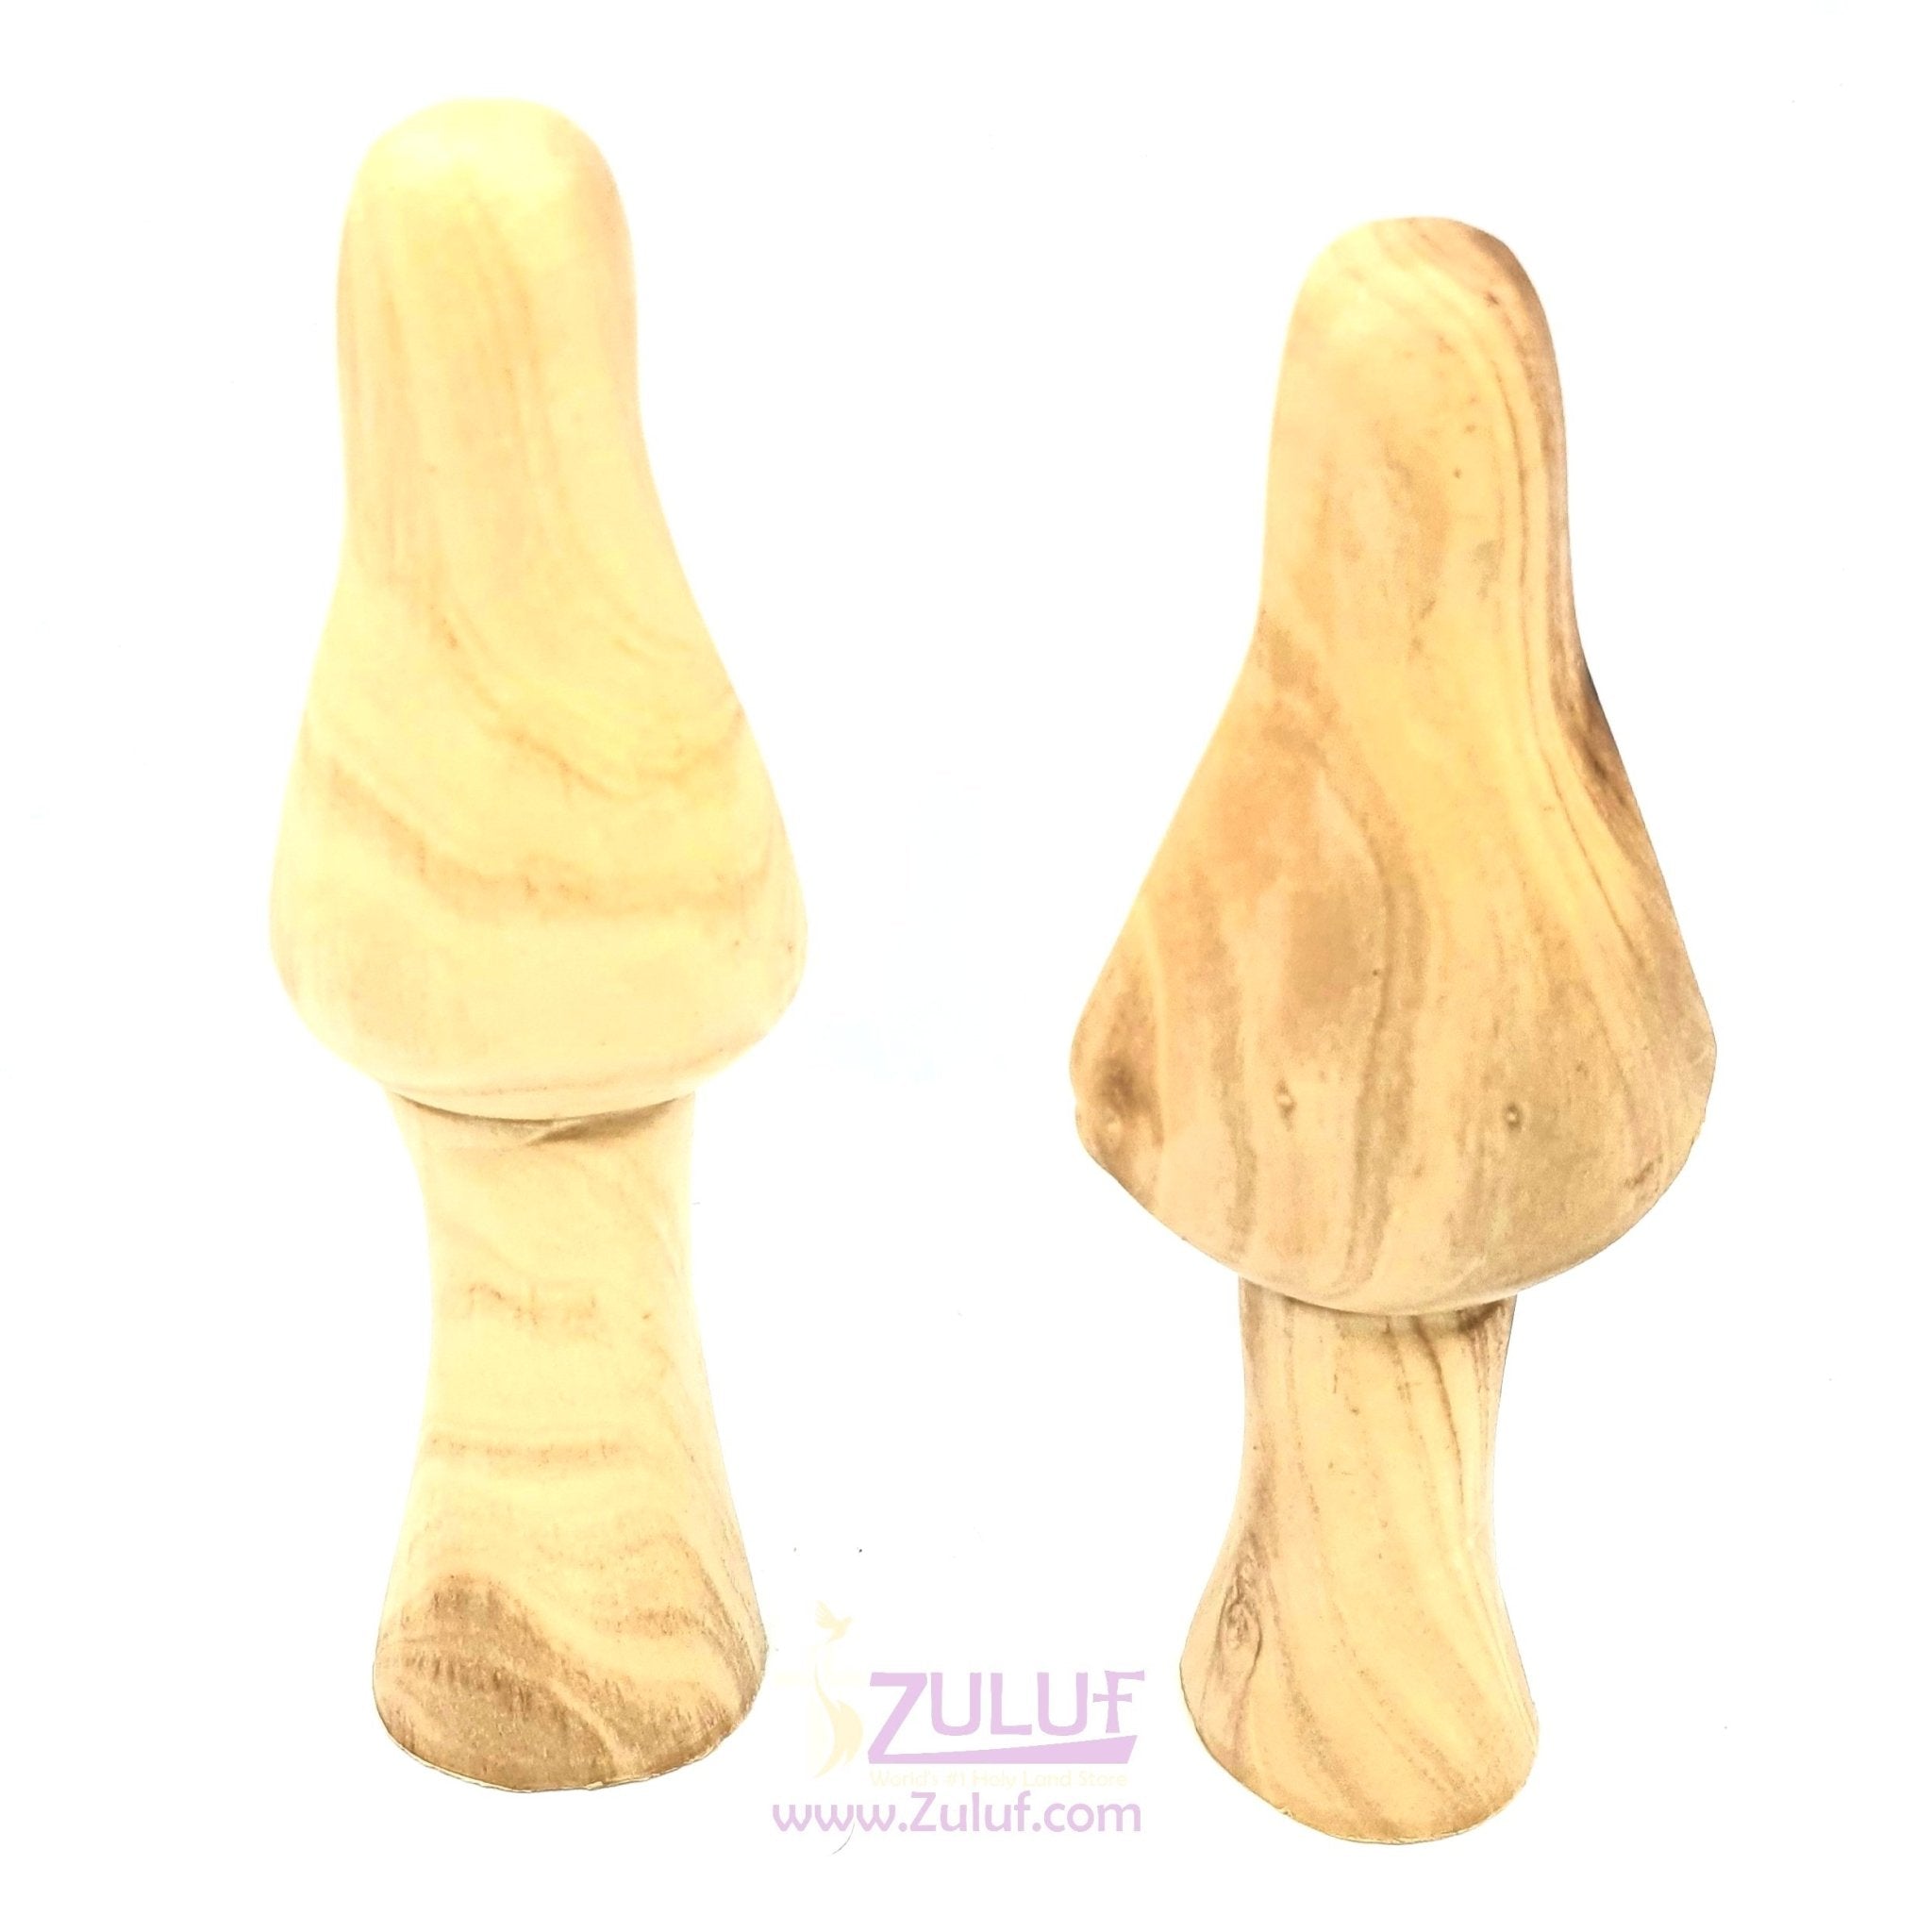 Mary and Elizabeth Olive Wood Statues Hand Made from Jerusalem 2 Pieces - MAR024 - Zuluf